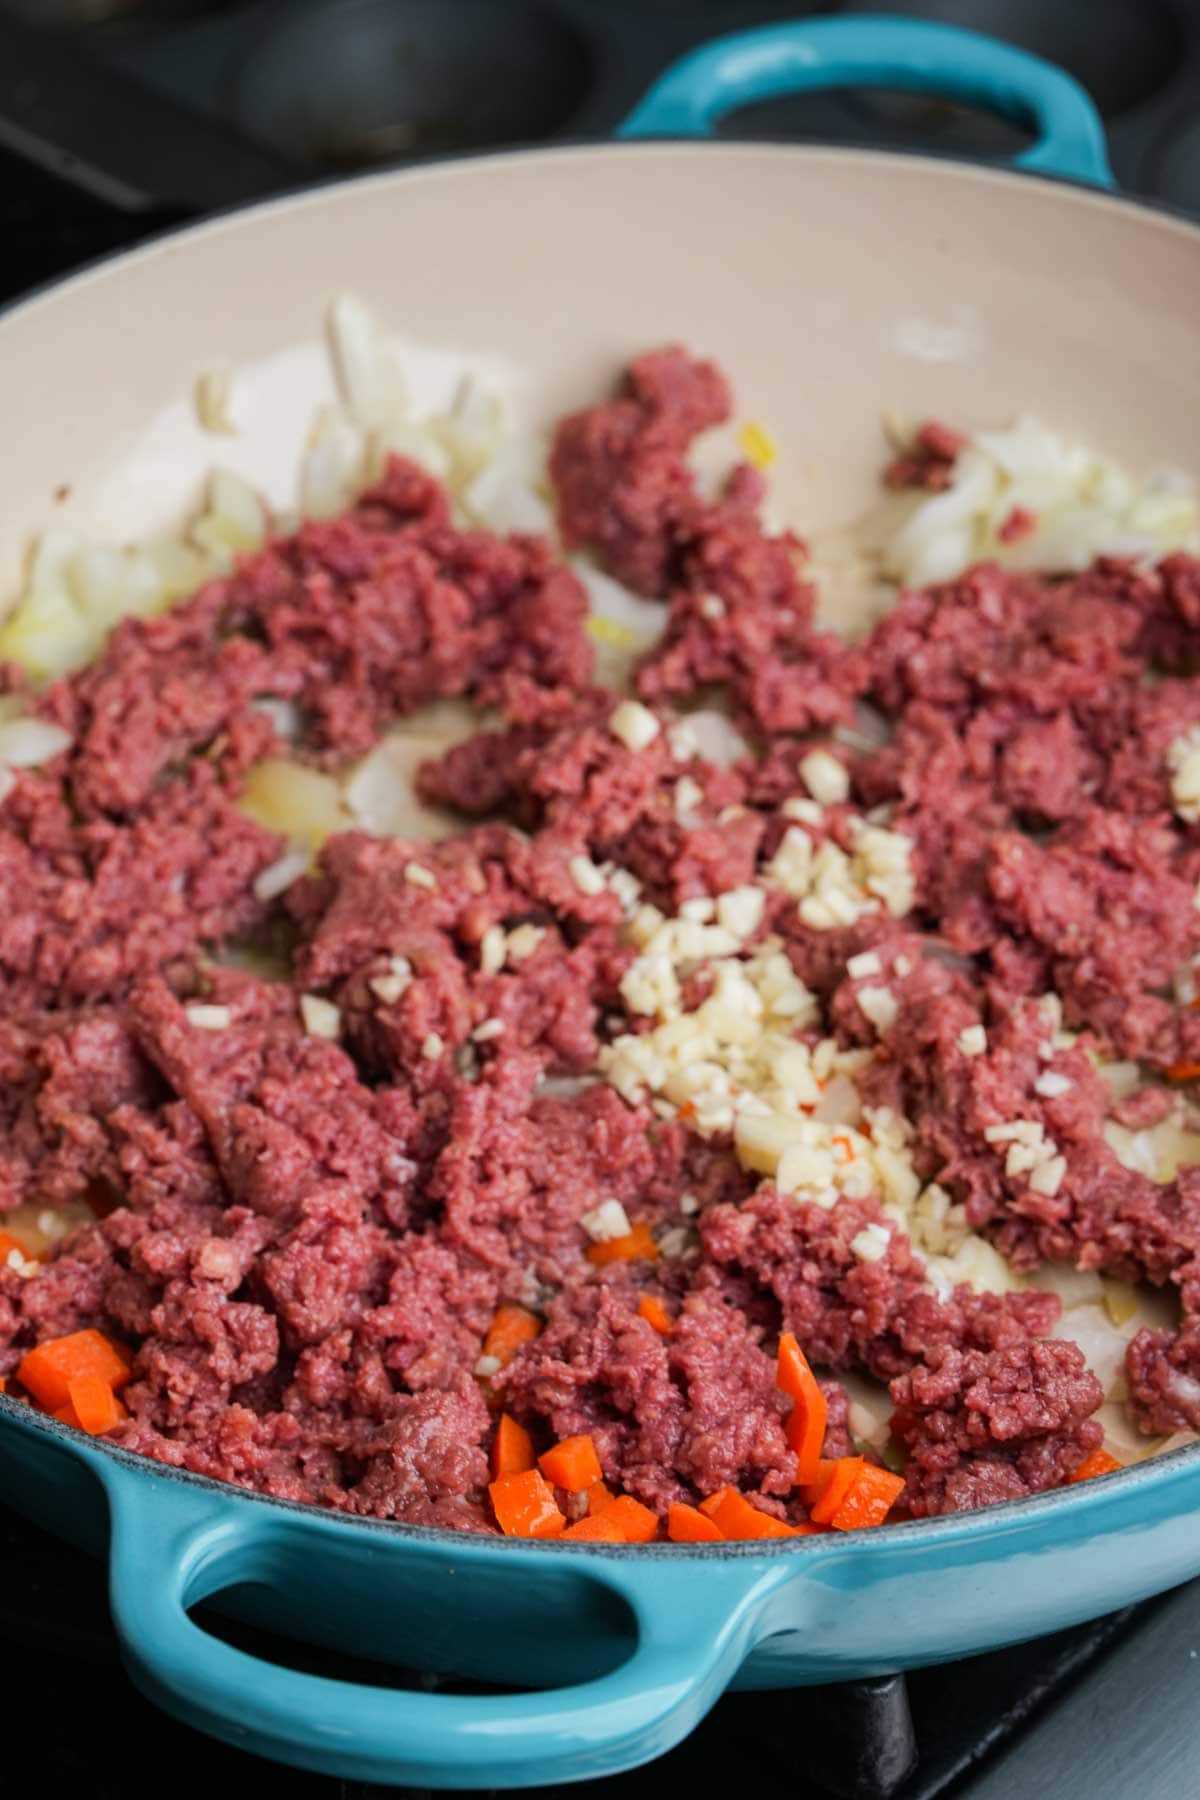 Vegan ground beef in a skillet with onions, garlic, and carrots.